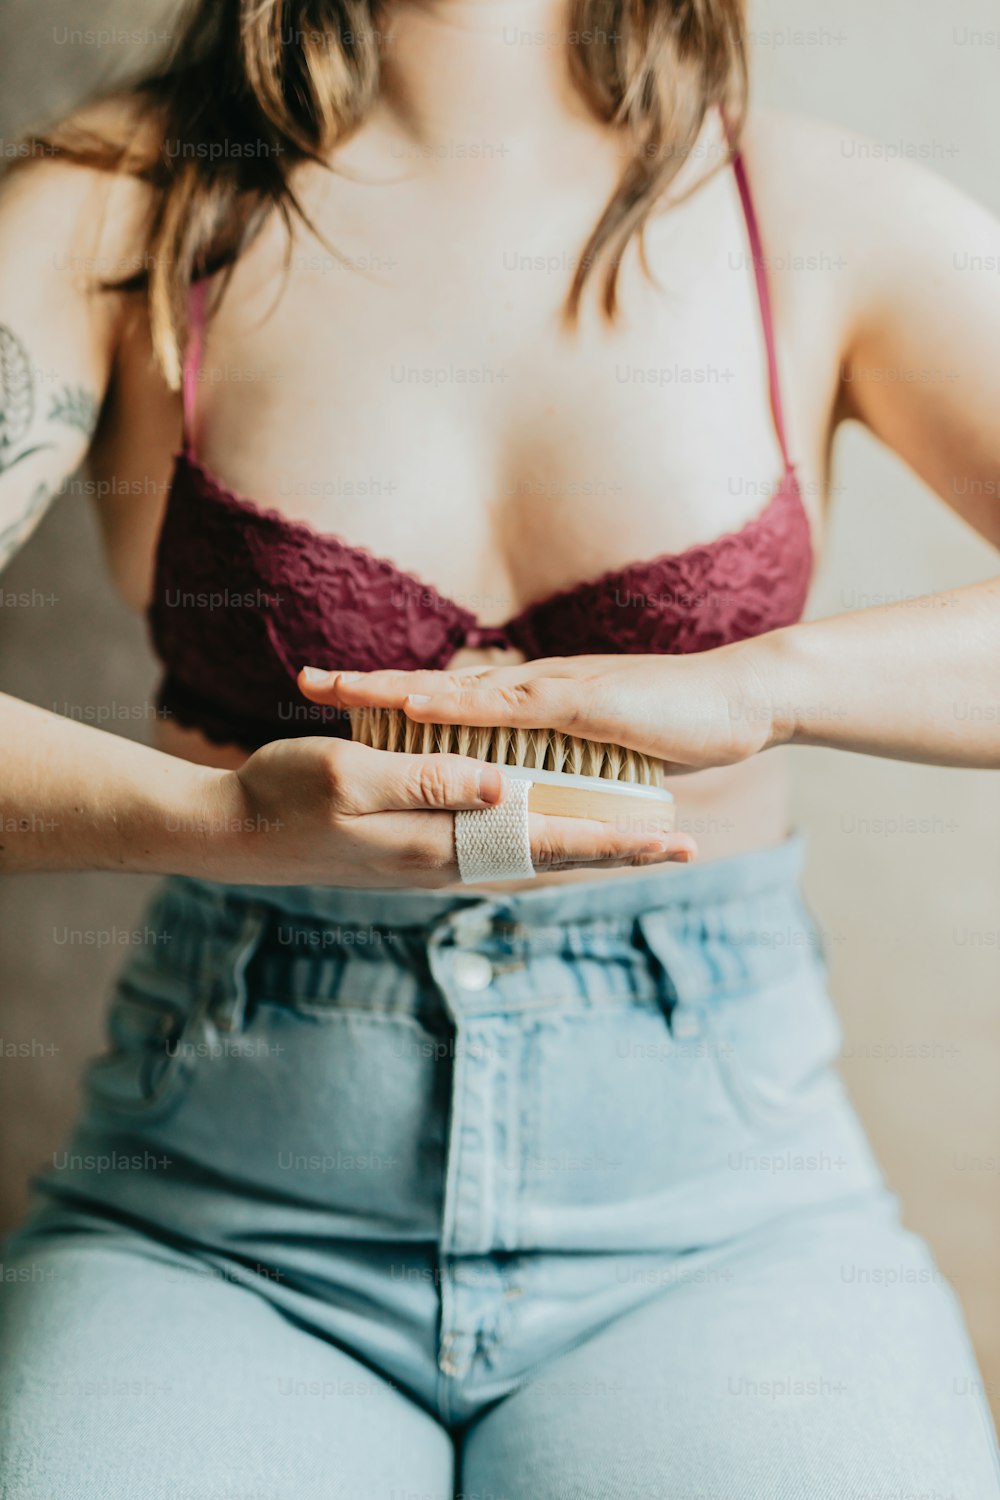 a woman in a bra top is holding a brush